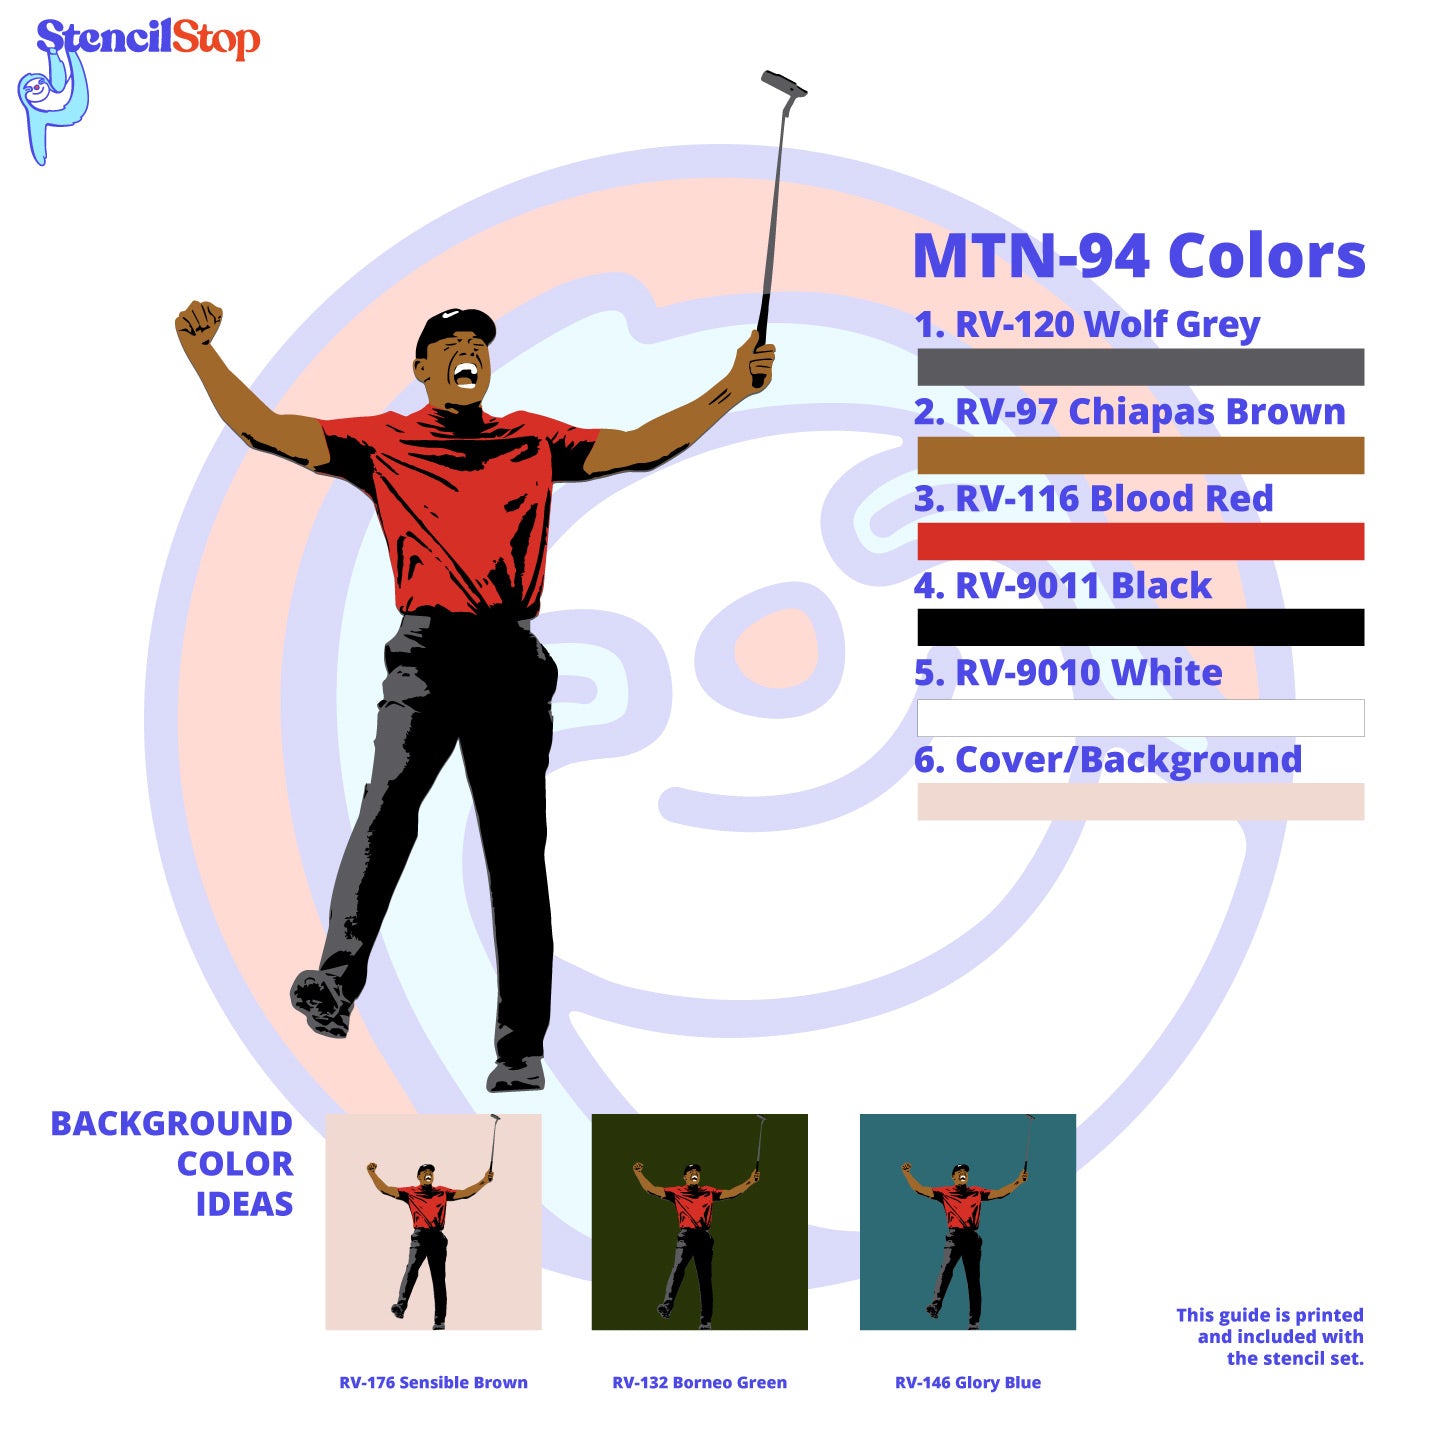 Tiger Woods "Victory" Layered Stencil Set Color guide